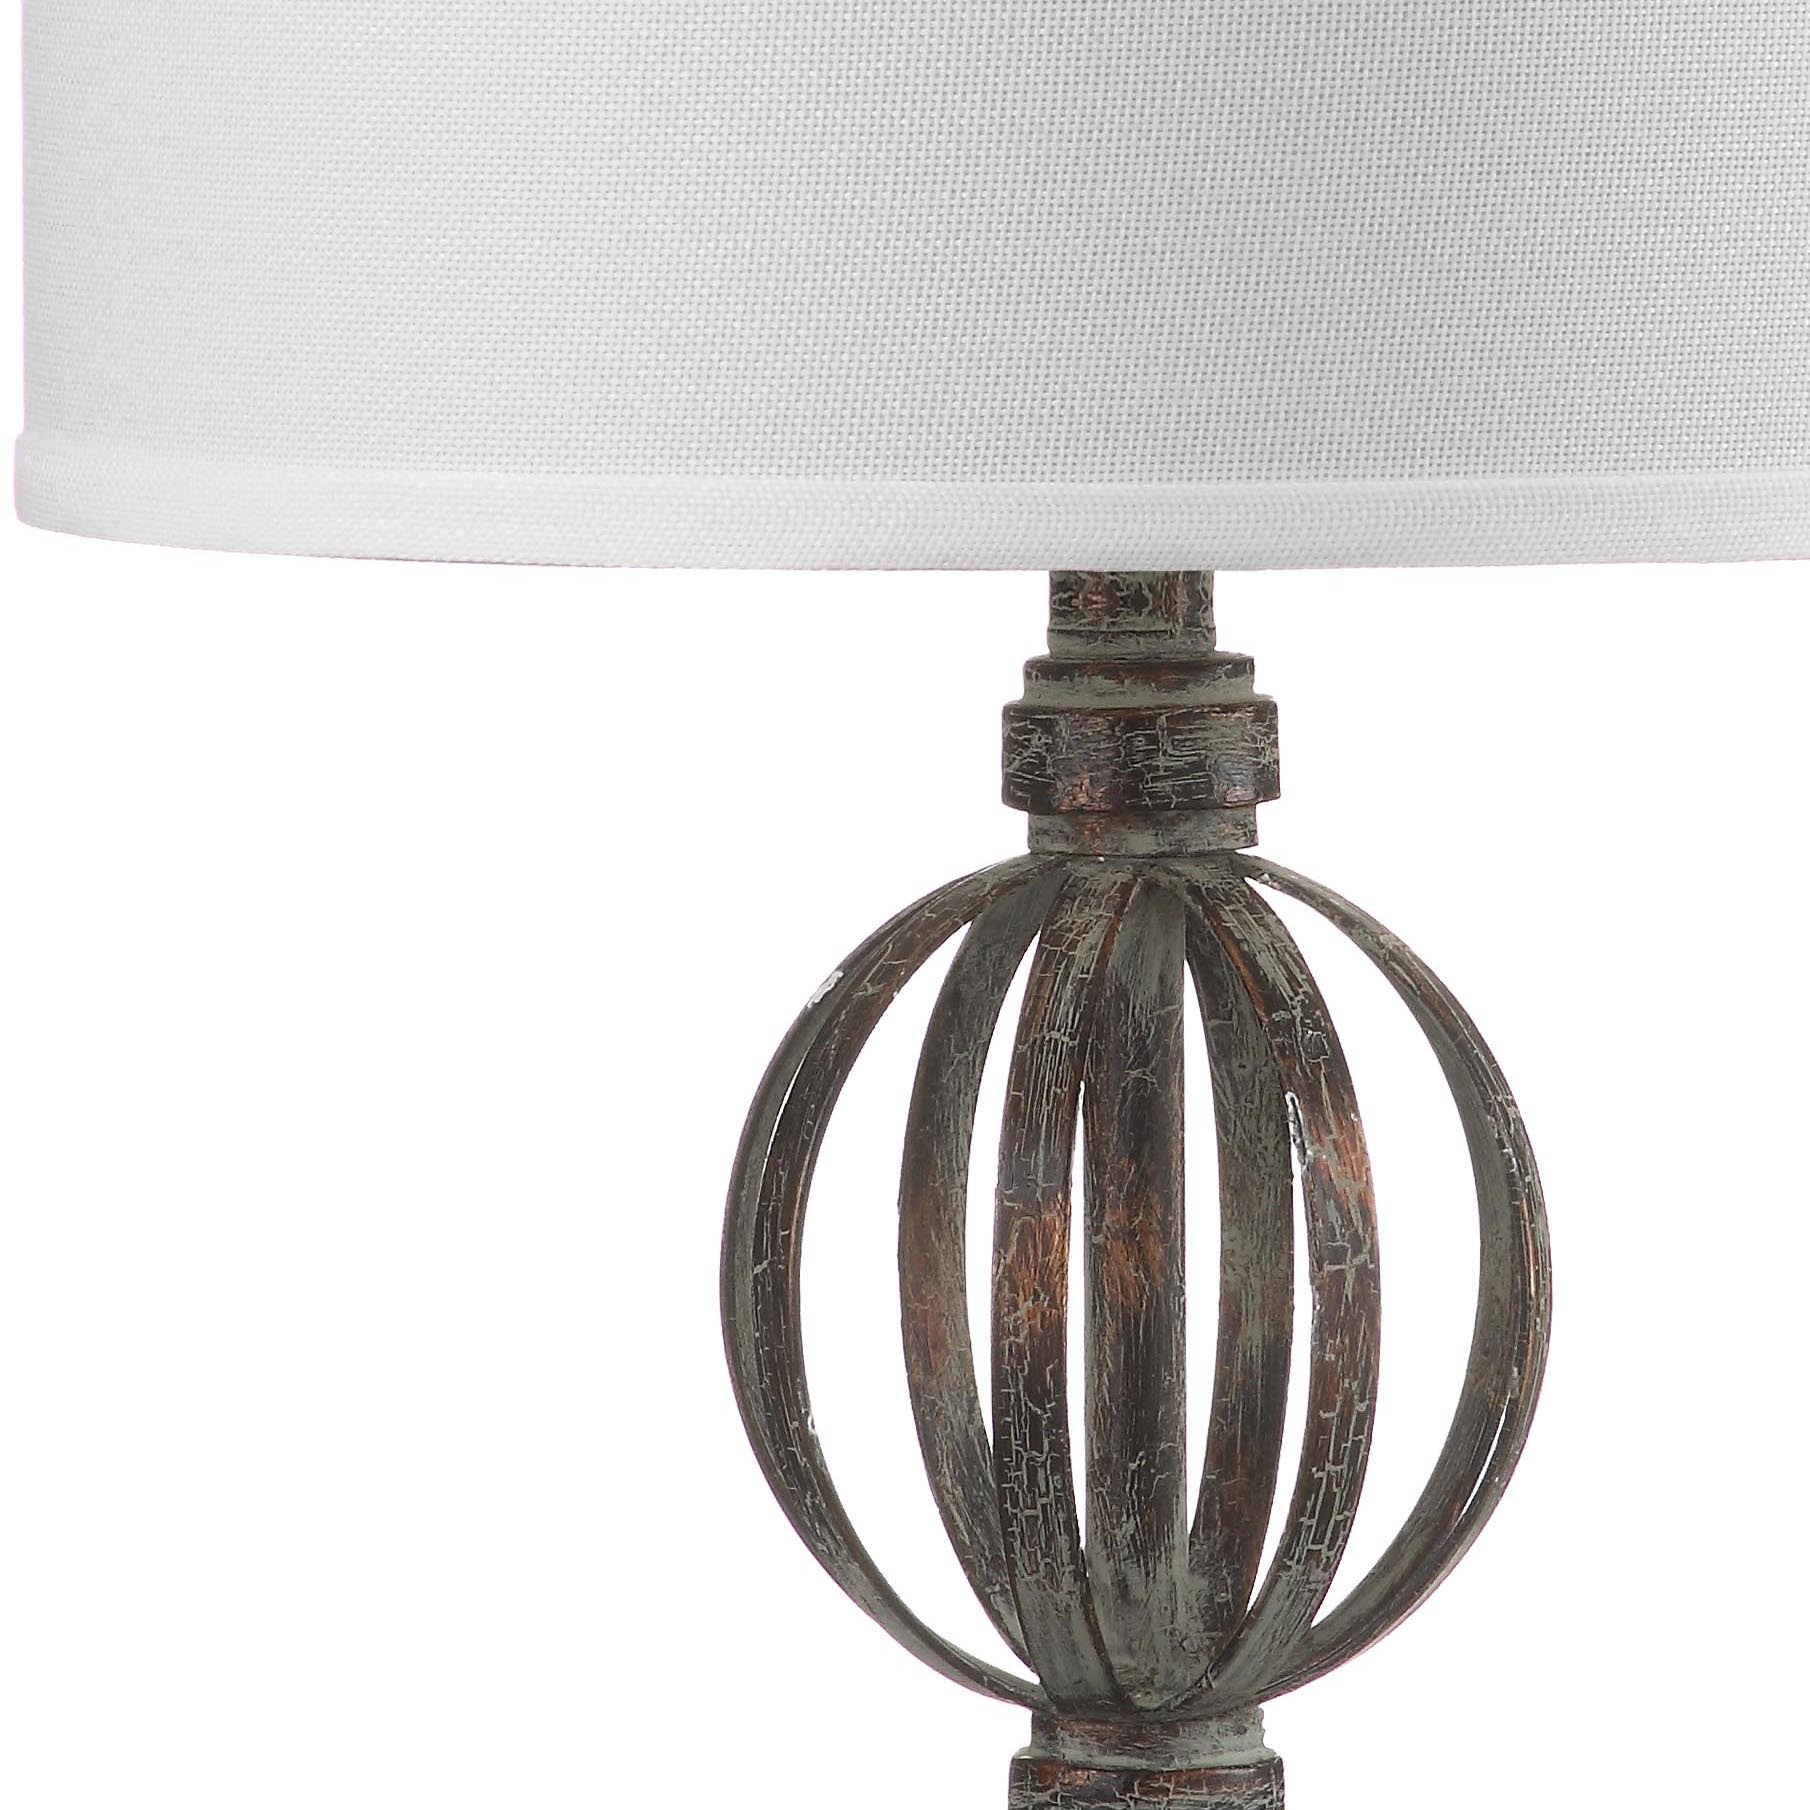 Calista 27.75-Inch H Double Sphere Table Lamp - Oil-Rubbed Bronze - Arlo Home - Image 3